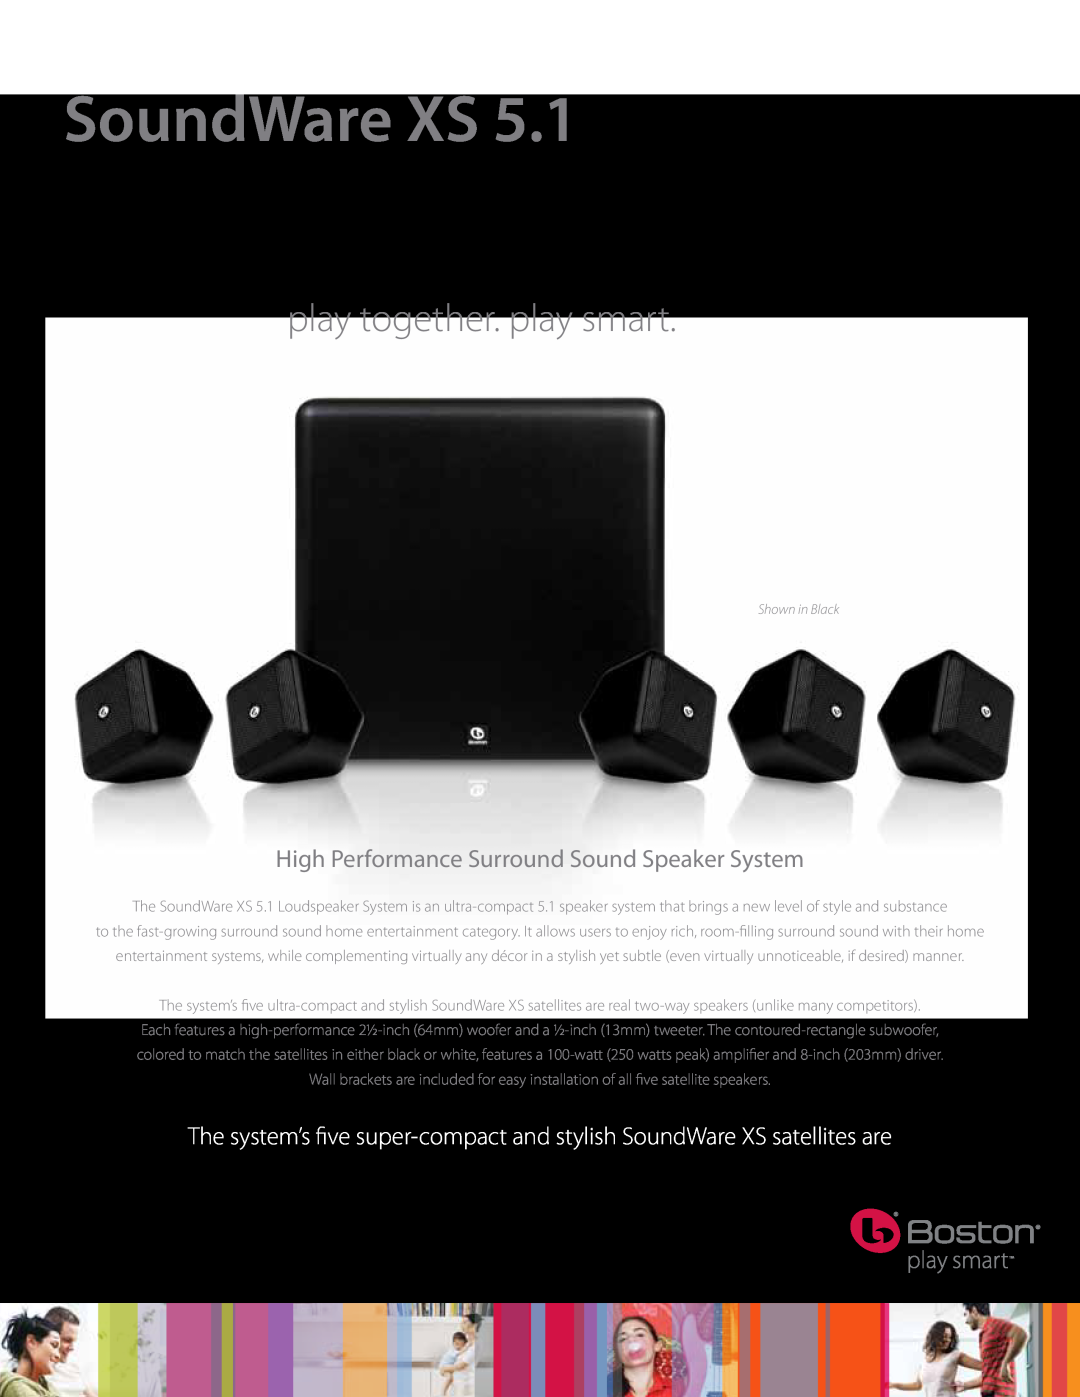 Boston Acoustics 5.1 manual SoundWare XS, play together. play smart, High Performance Surround Sound Speaker System 